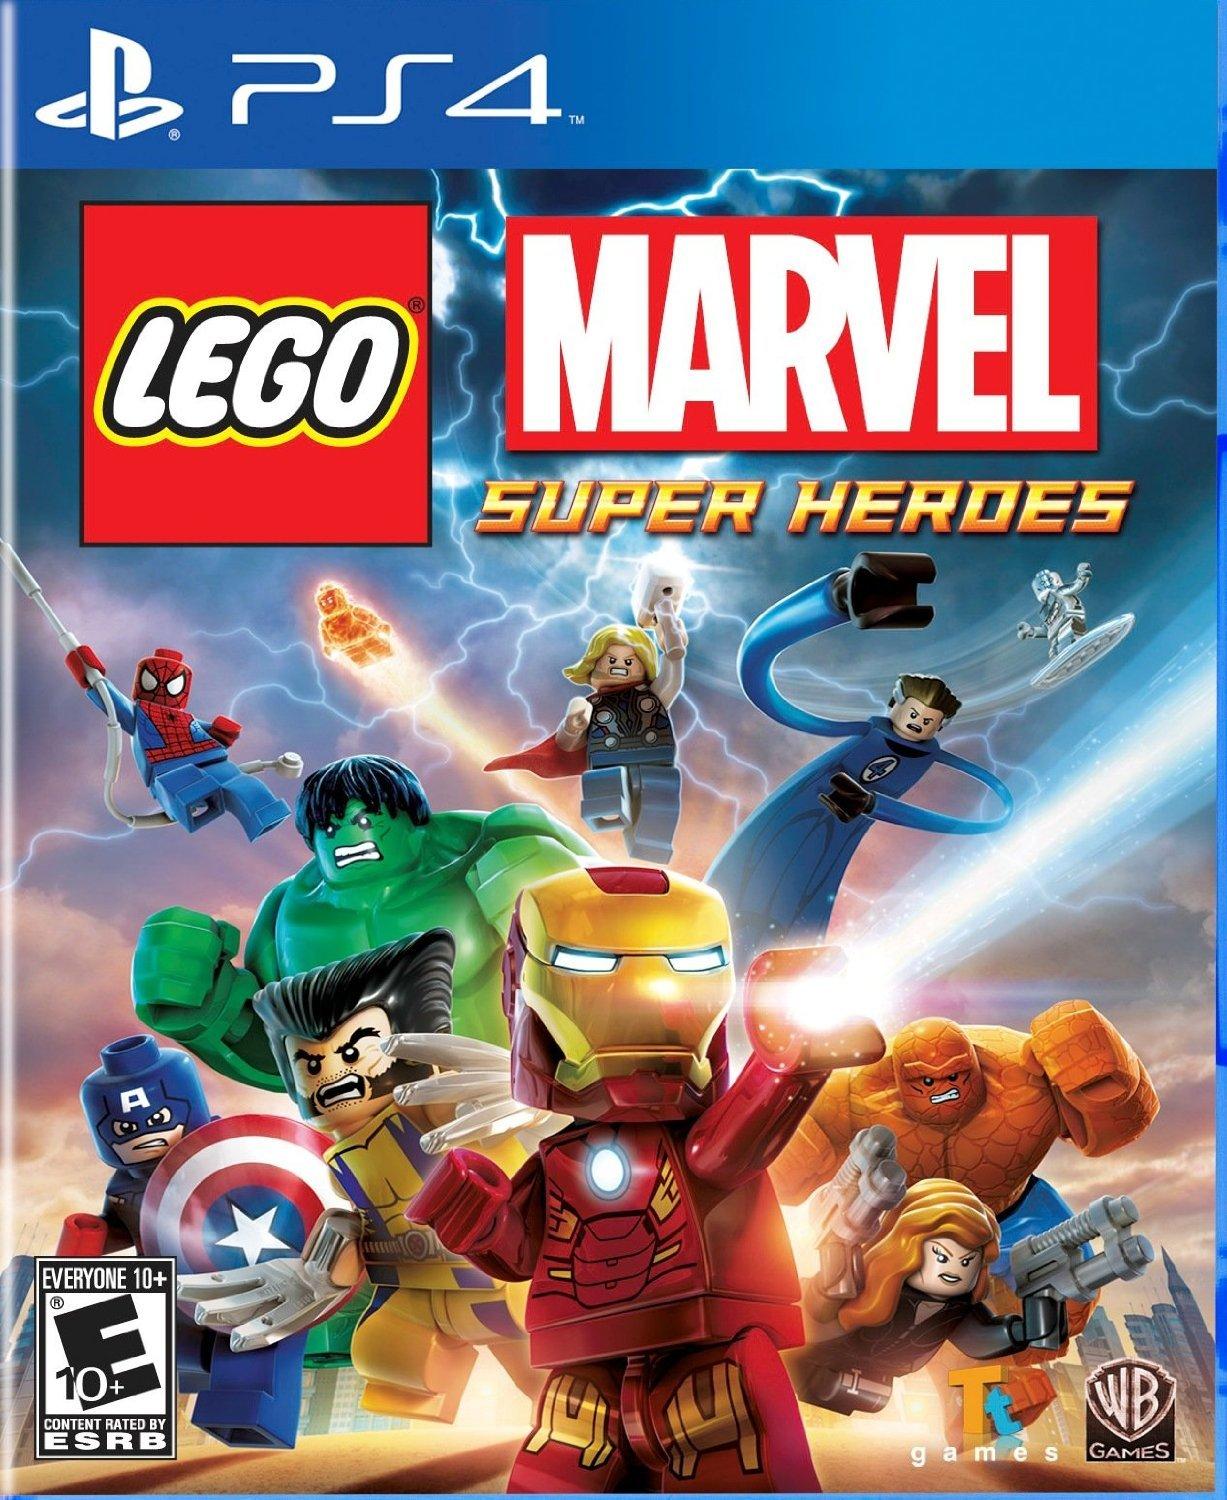 lego toy story 4 video game